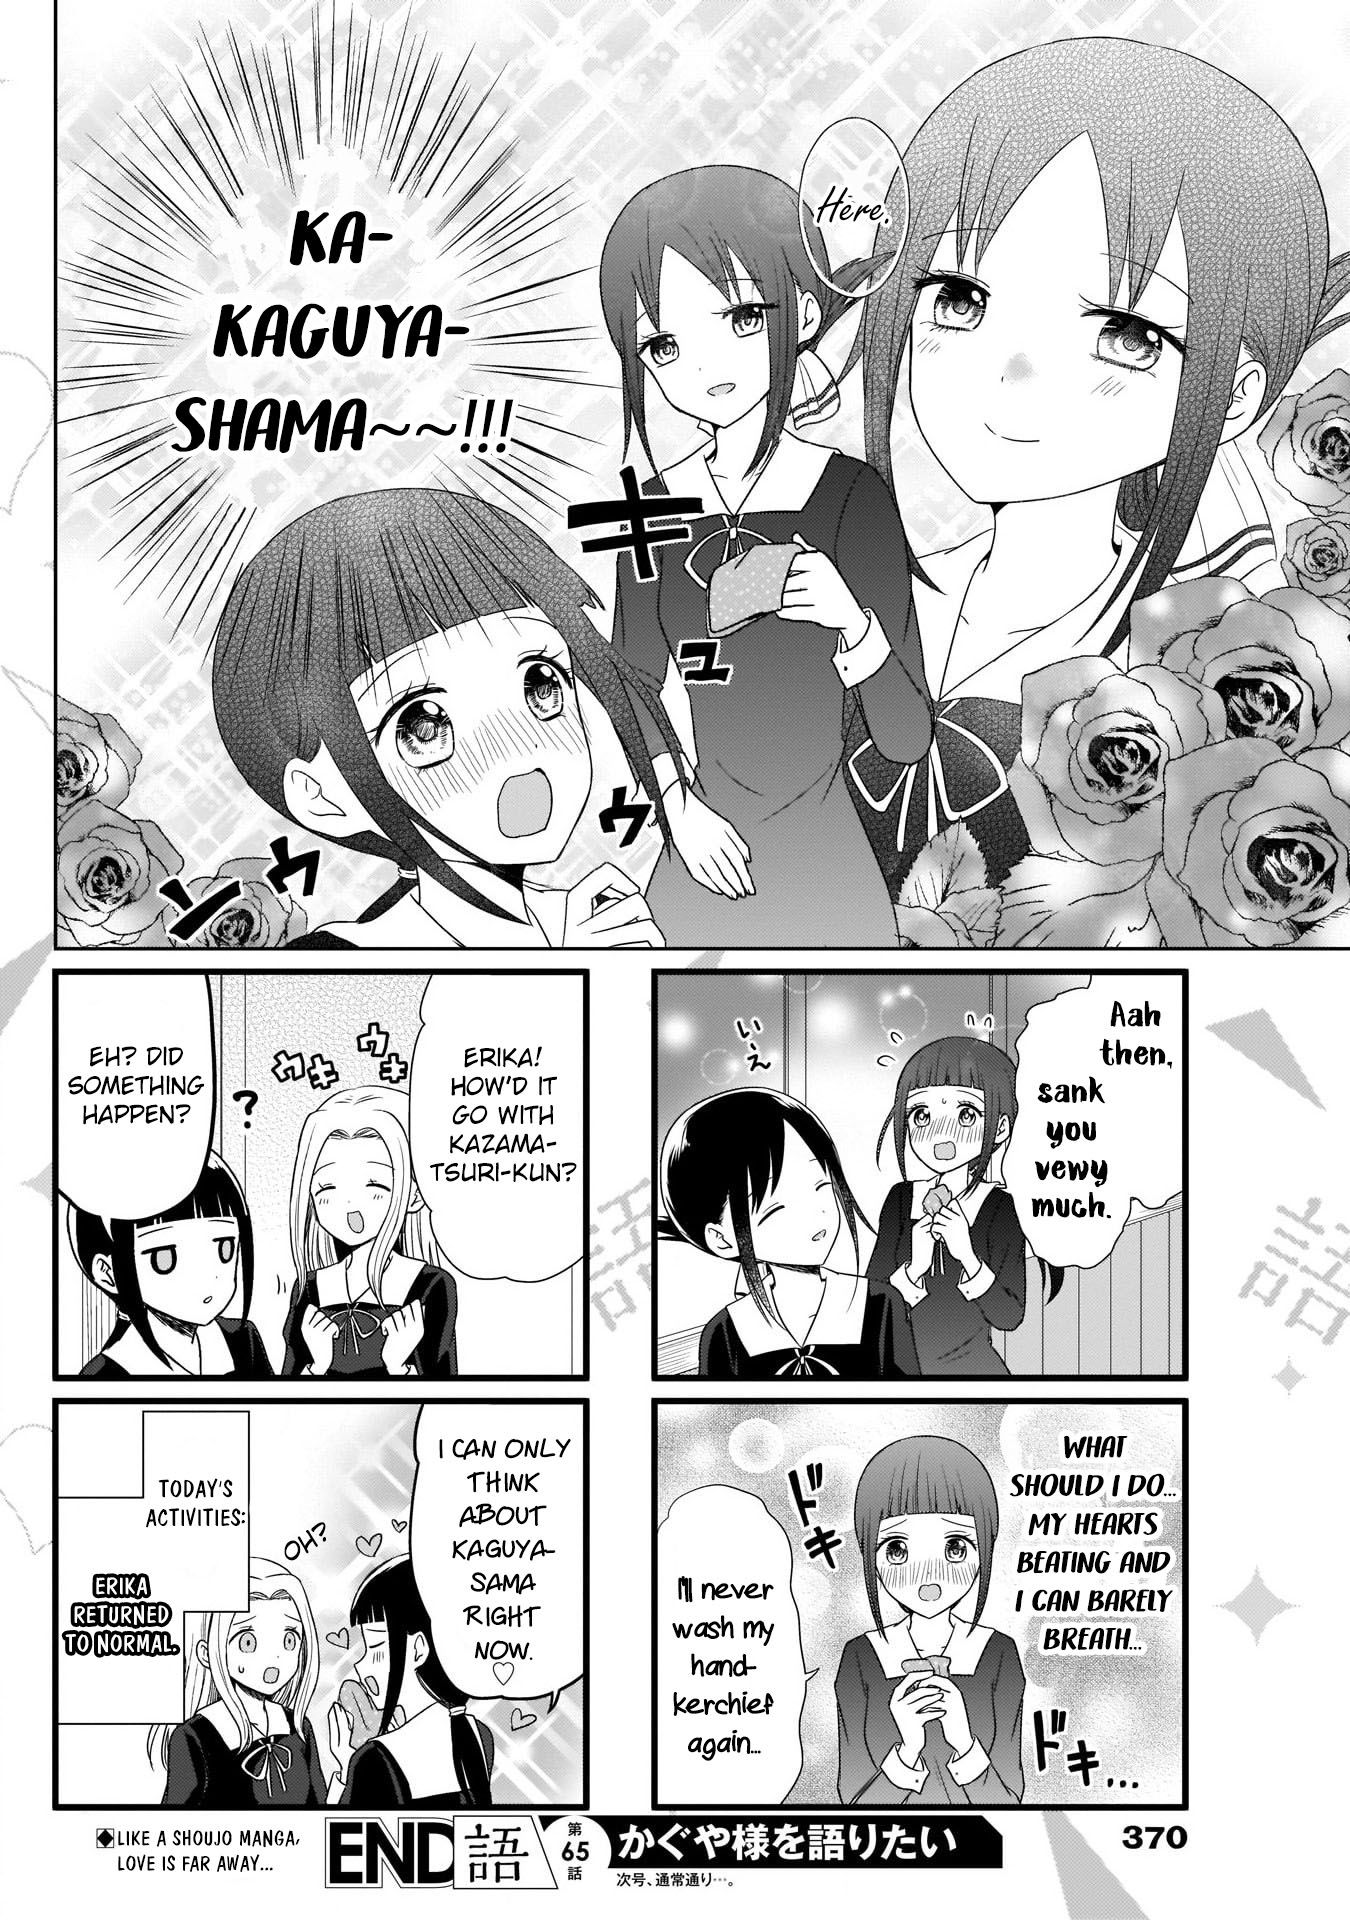 we_want_to_talk_about_kaguya_65_5